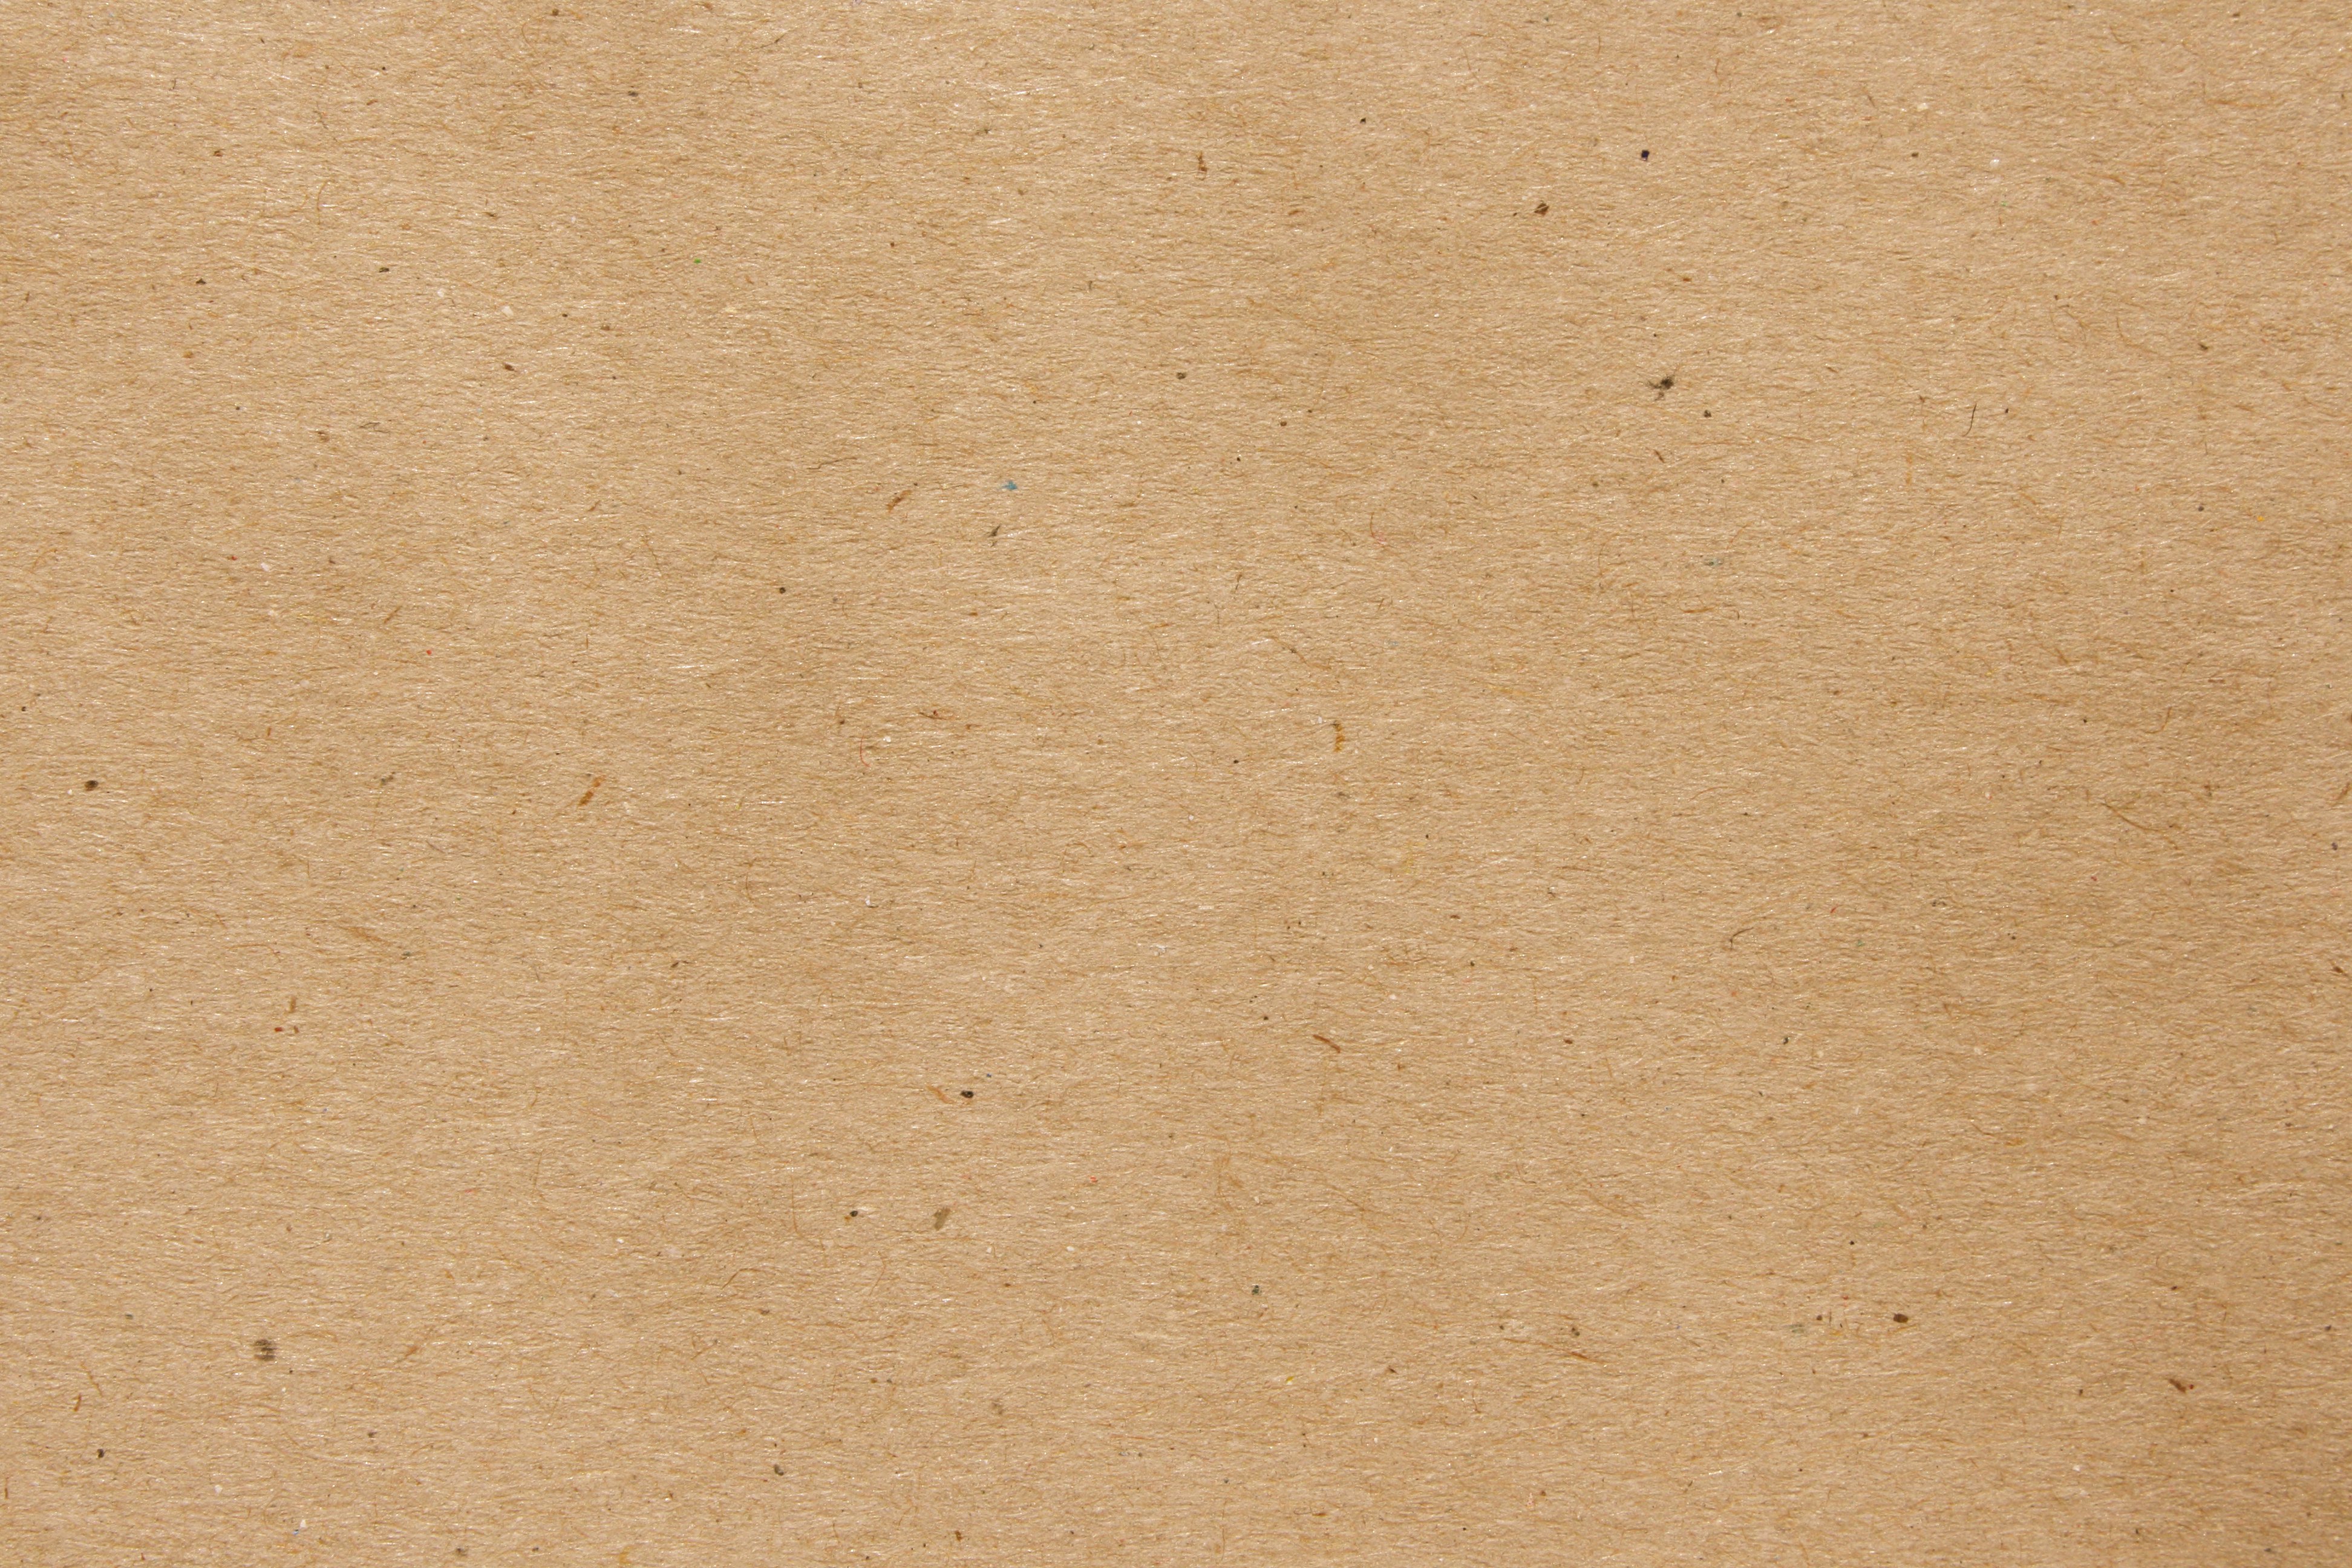 Light Brown Or Tan Paper Texture With Flecks Picture Photograph